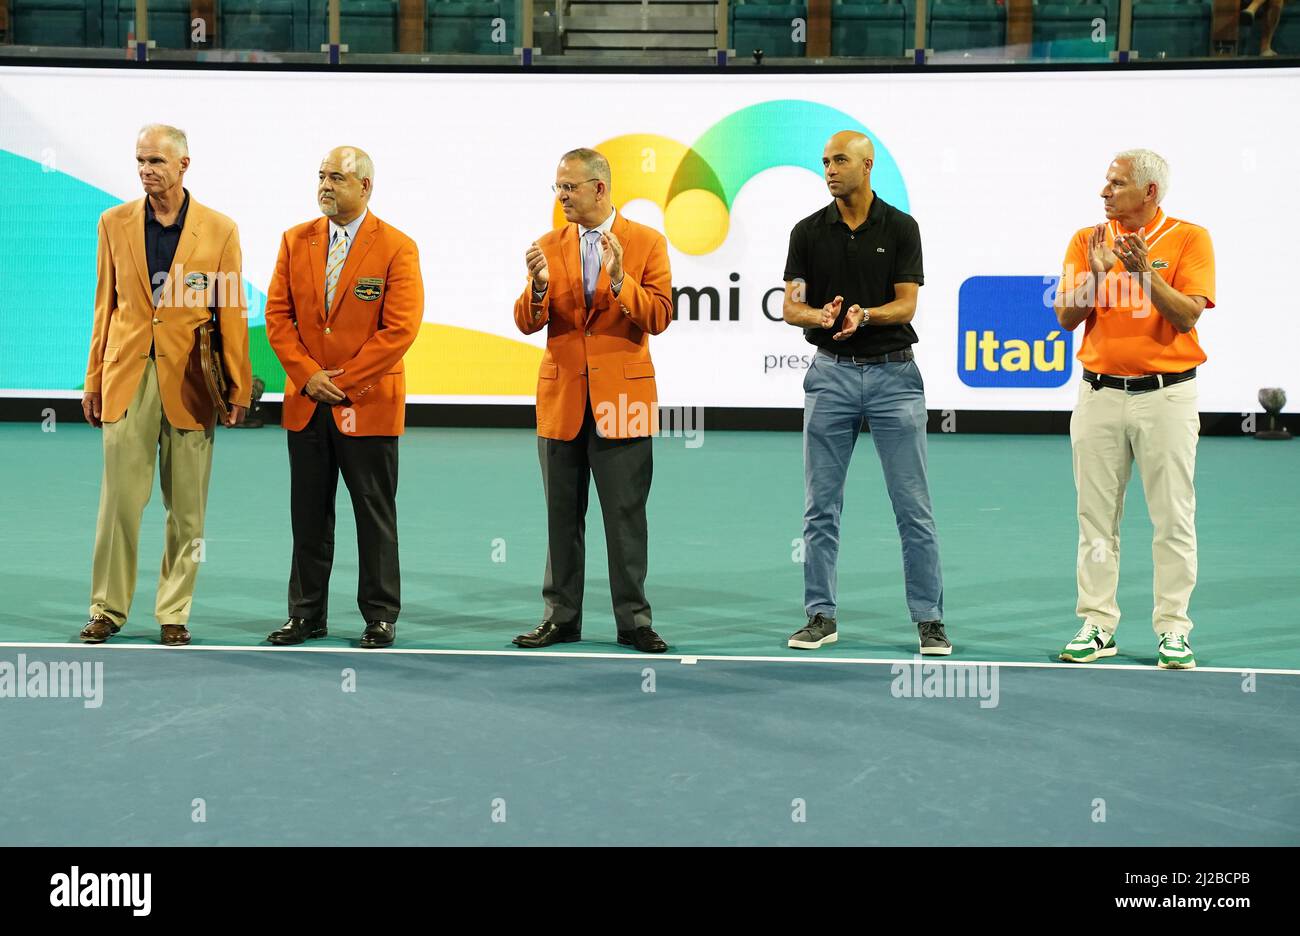 MIAMI GARDENS, FLORIDA - MARCH 30: Members of the Orange Bowl committee Doug Wiley, Frank Gonzalez and Eric Poms and Miami Open tournament director James Blake, Orange Bowl Committee Member and Senior Vice President IMG Tennis Josh Ripple to inducted Jim Courier into the Orange Bowl Tennis Hall of Fame during the Miami Open  at Hard Rock Stadium on March 30, 2022 in Miami Gardens, Florida. (Photo by JL/Sipa USA) Stock Photo